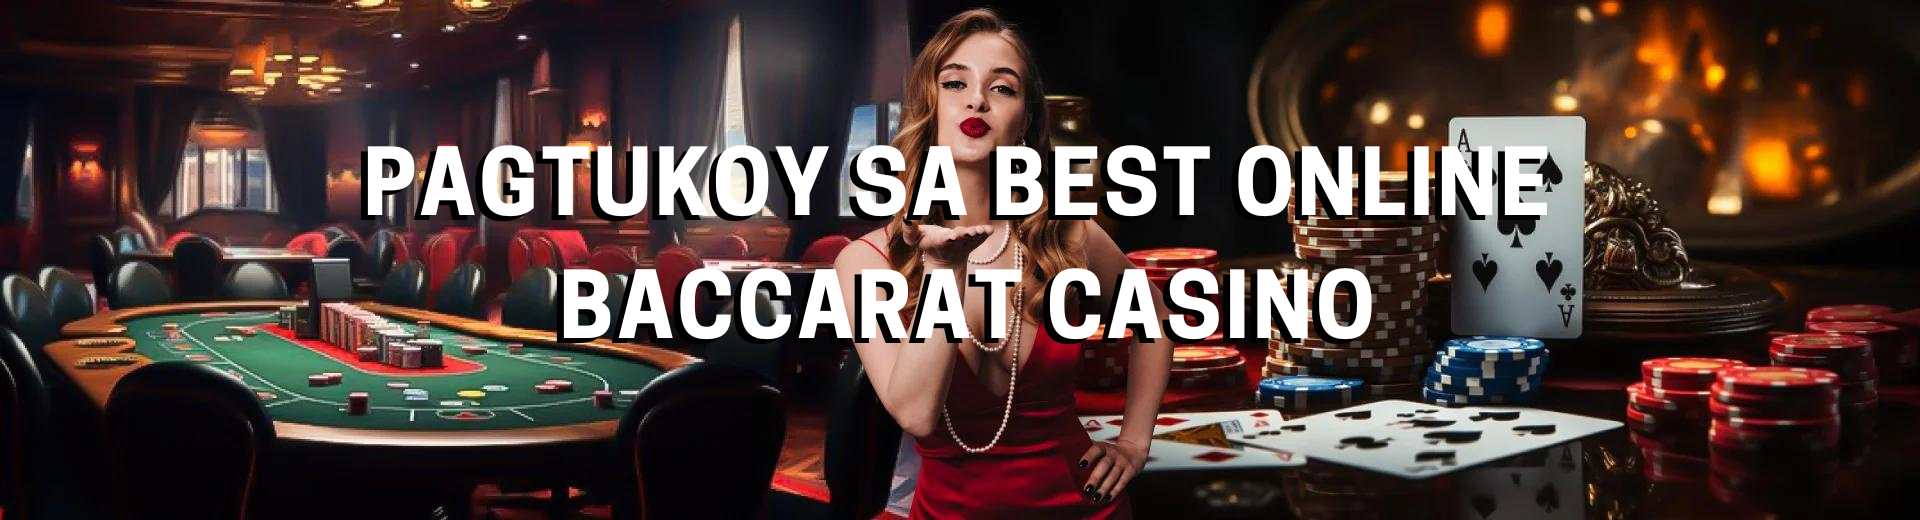 Pagtukoy sa Best Online Baccarat Casino